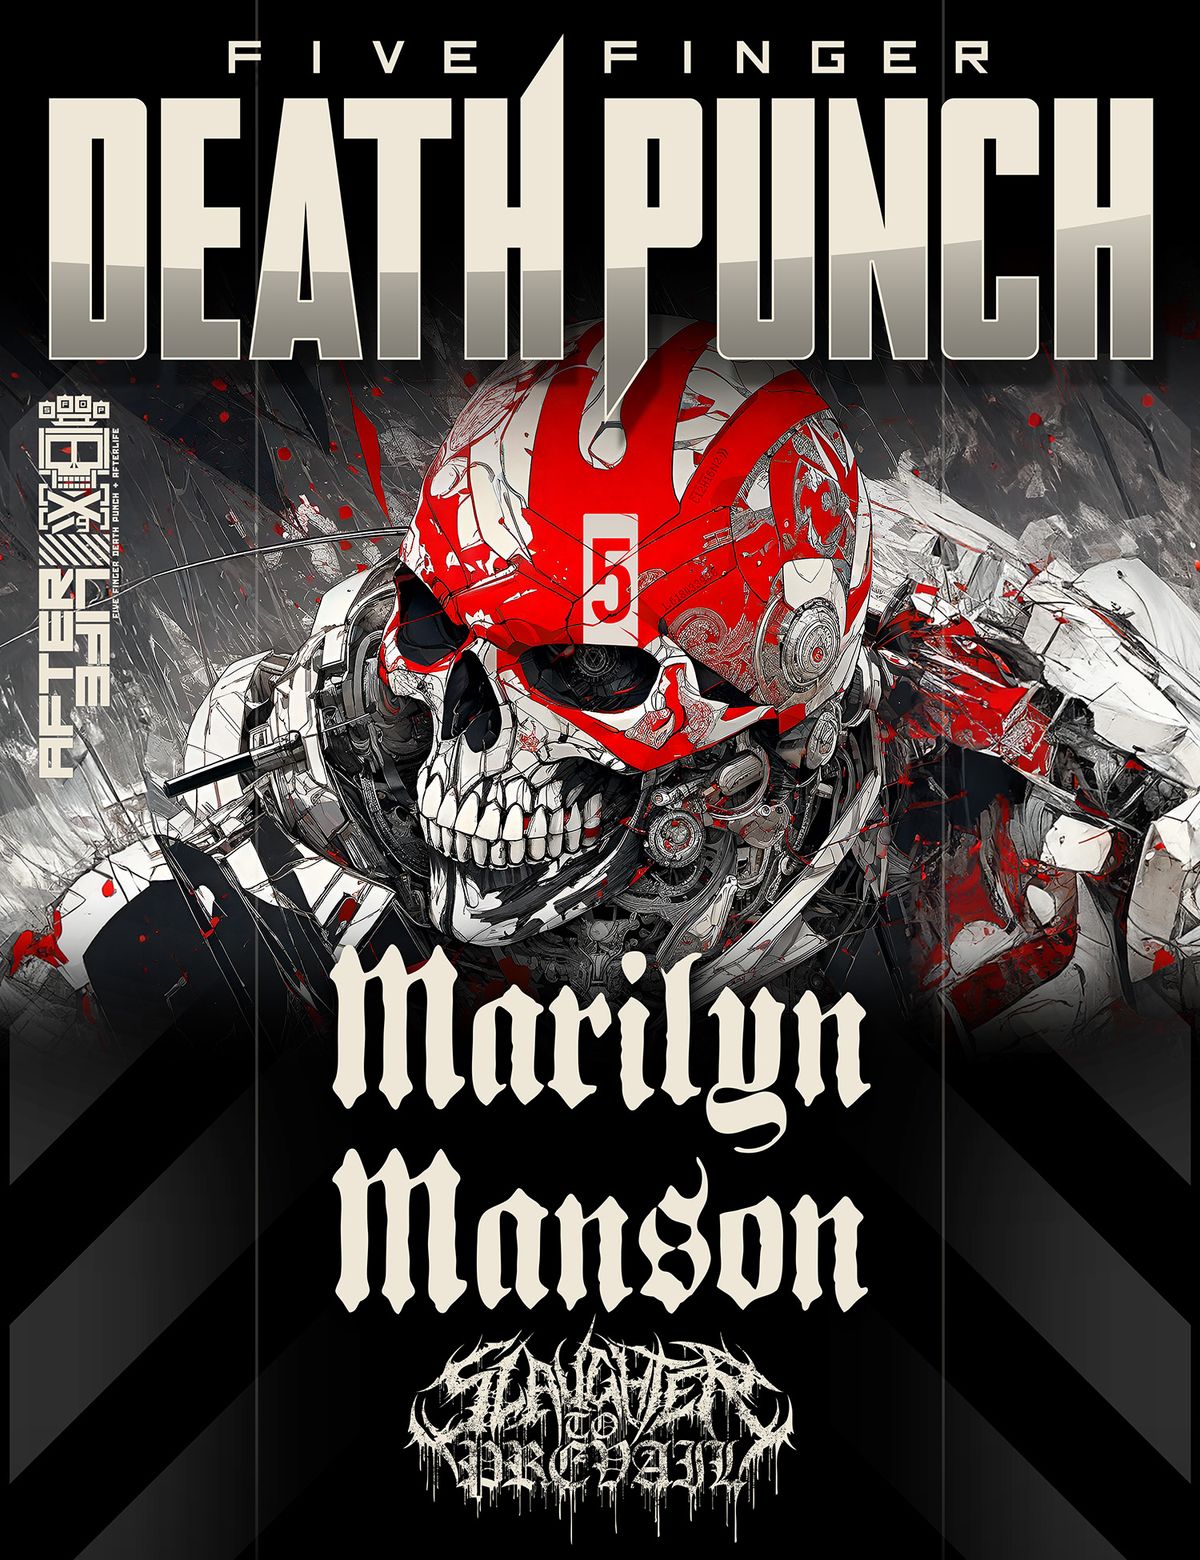 Five Finger Death Punch at MGM Grand Garden Arena